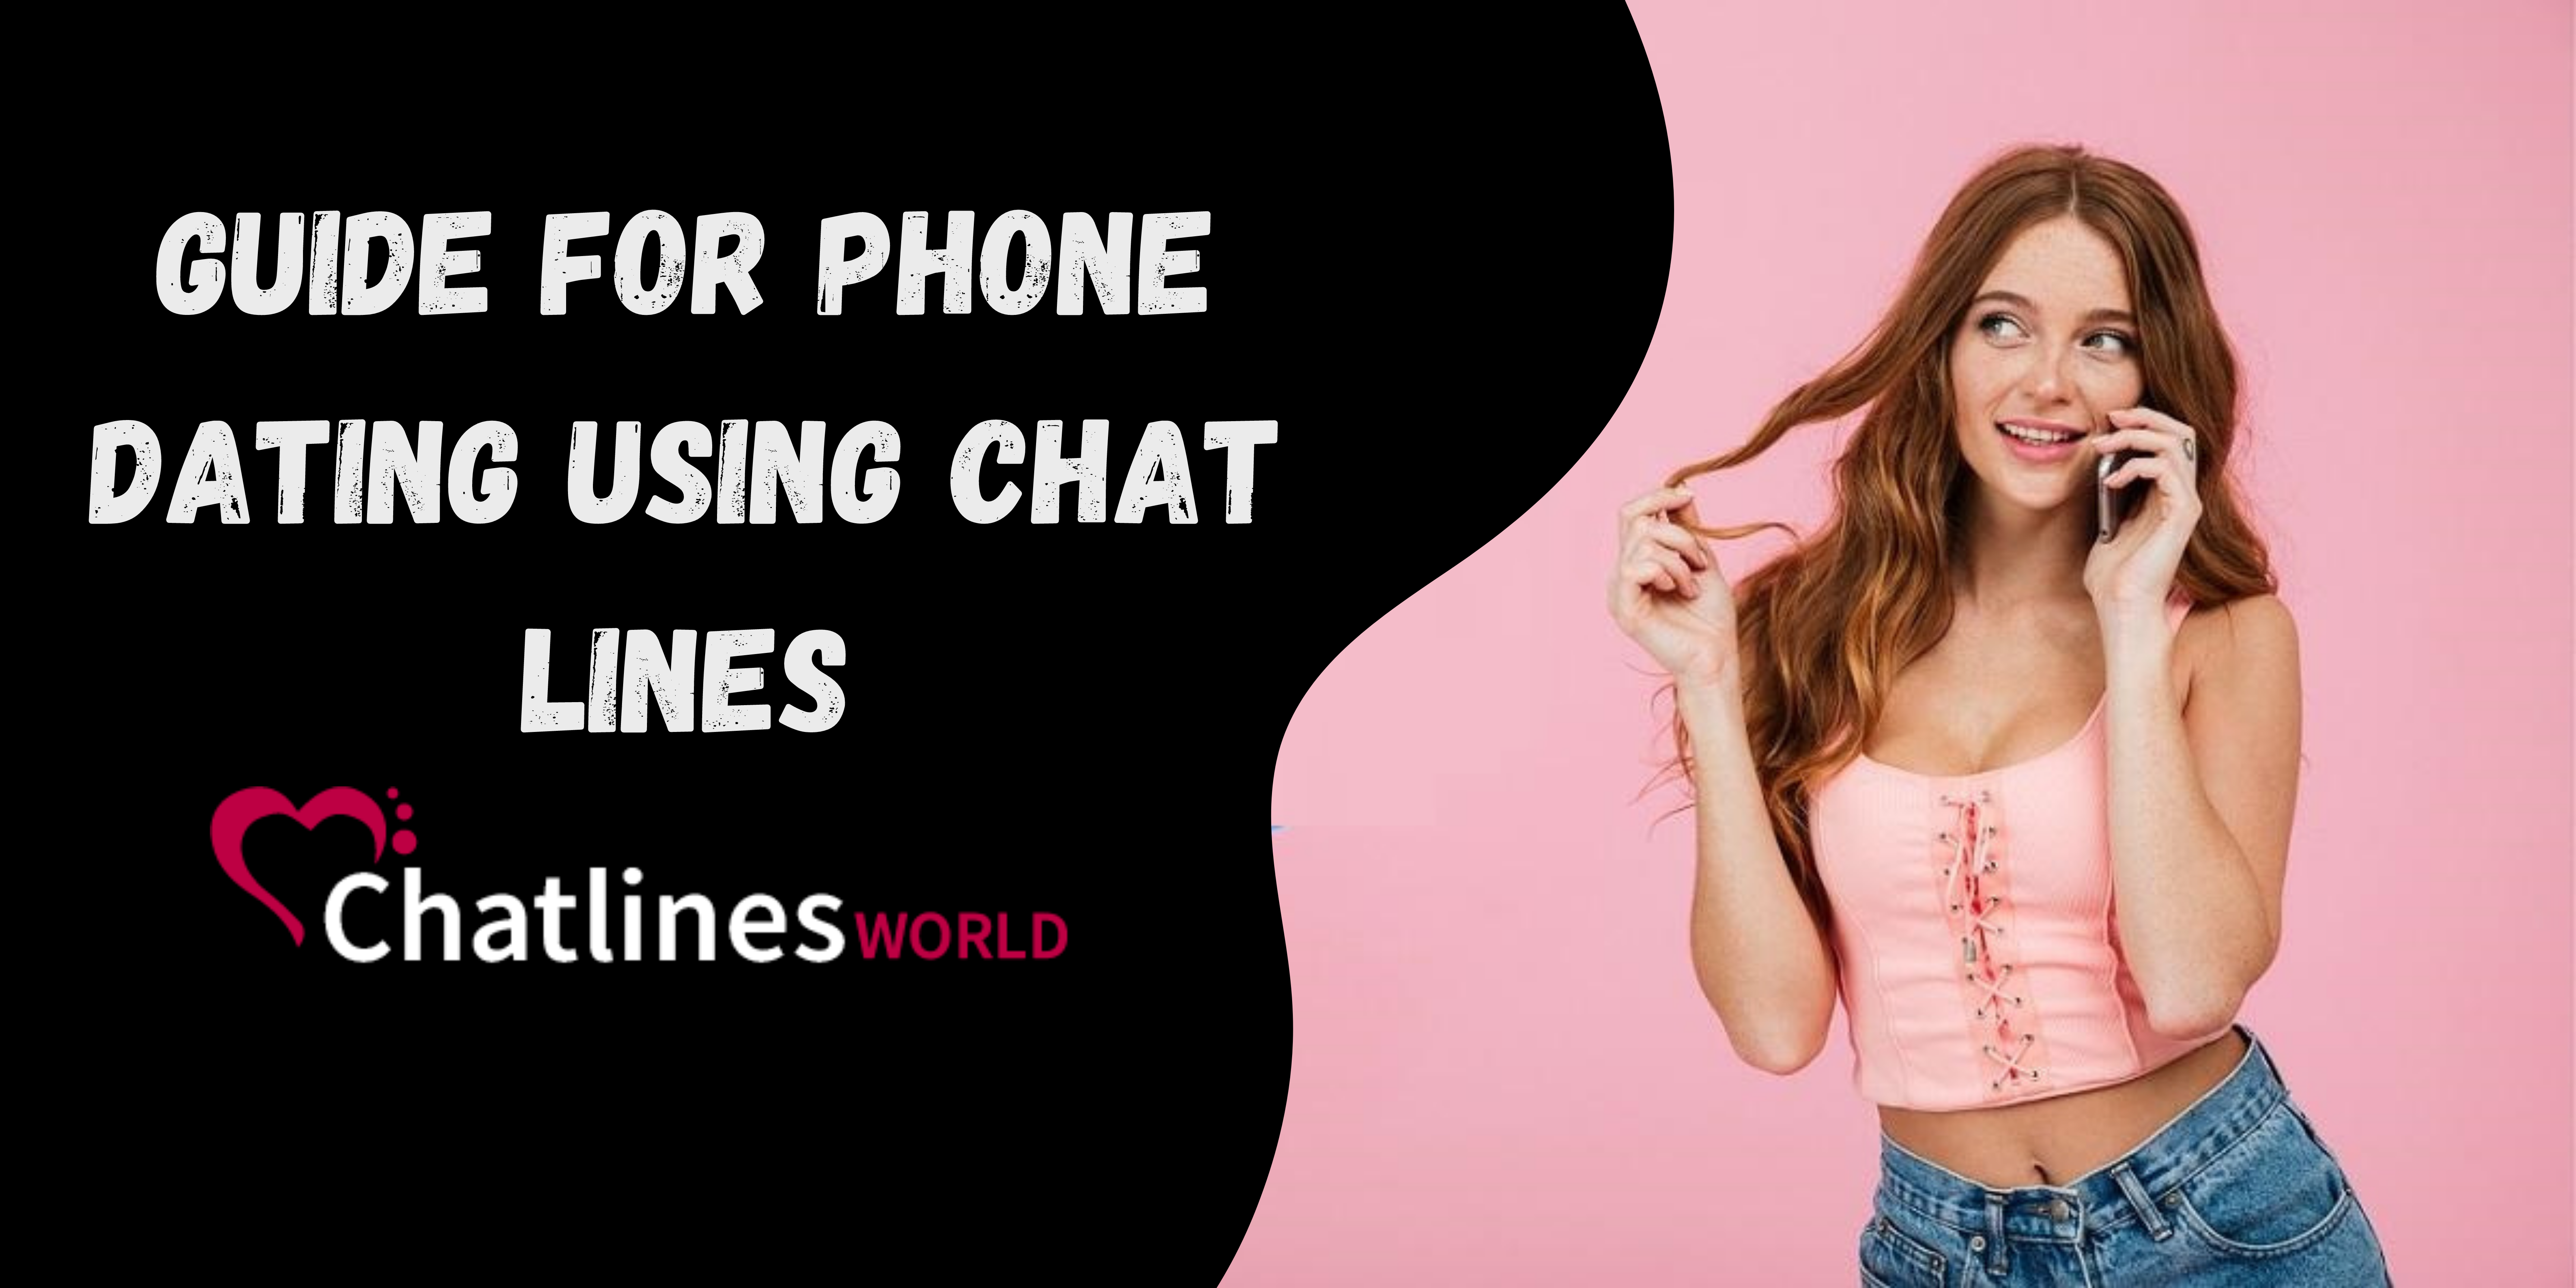 Guide for Phone Dating Using Chat Lines